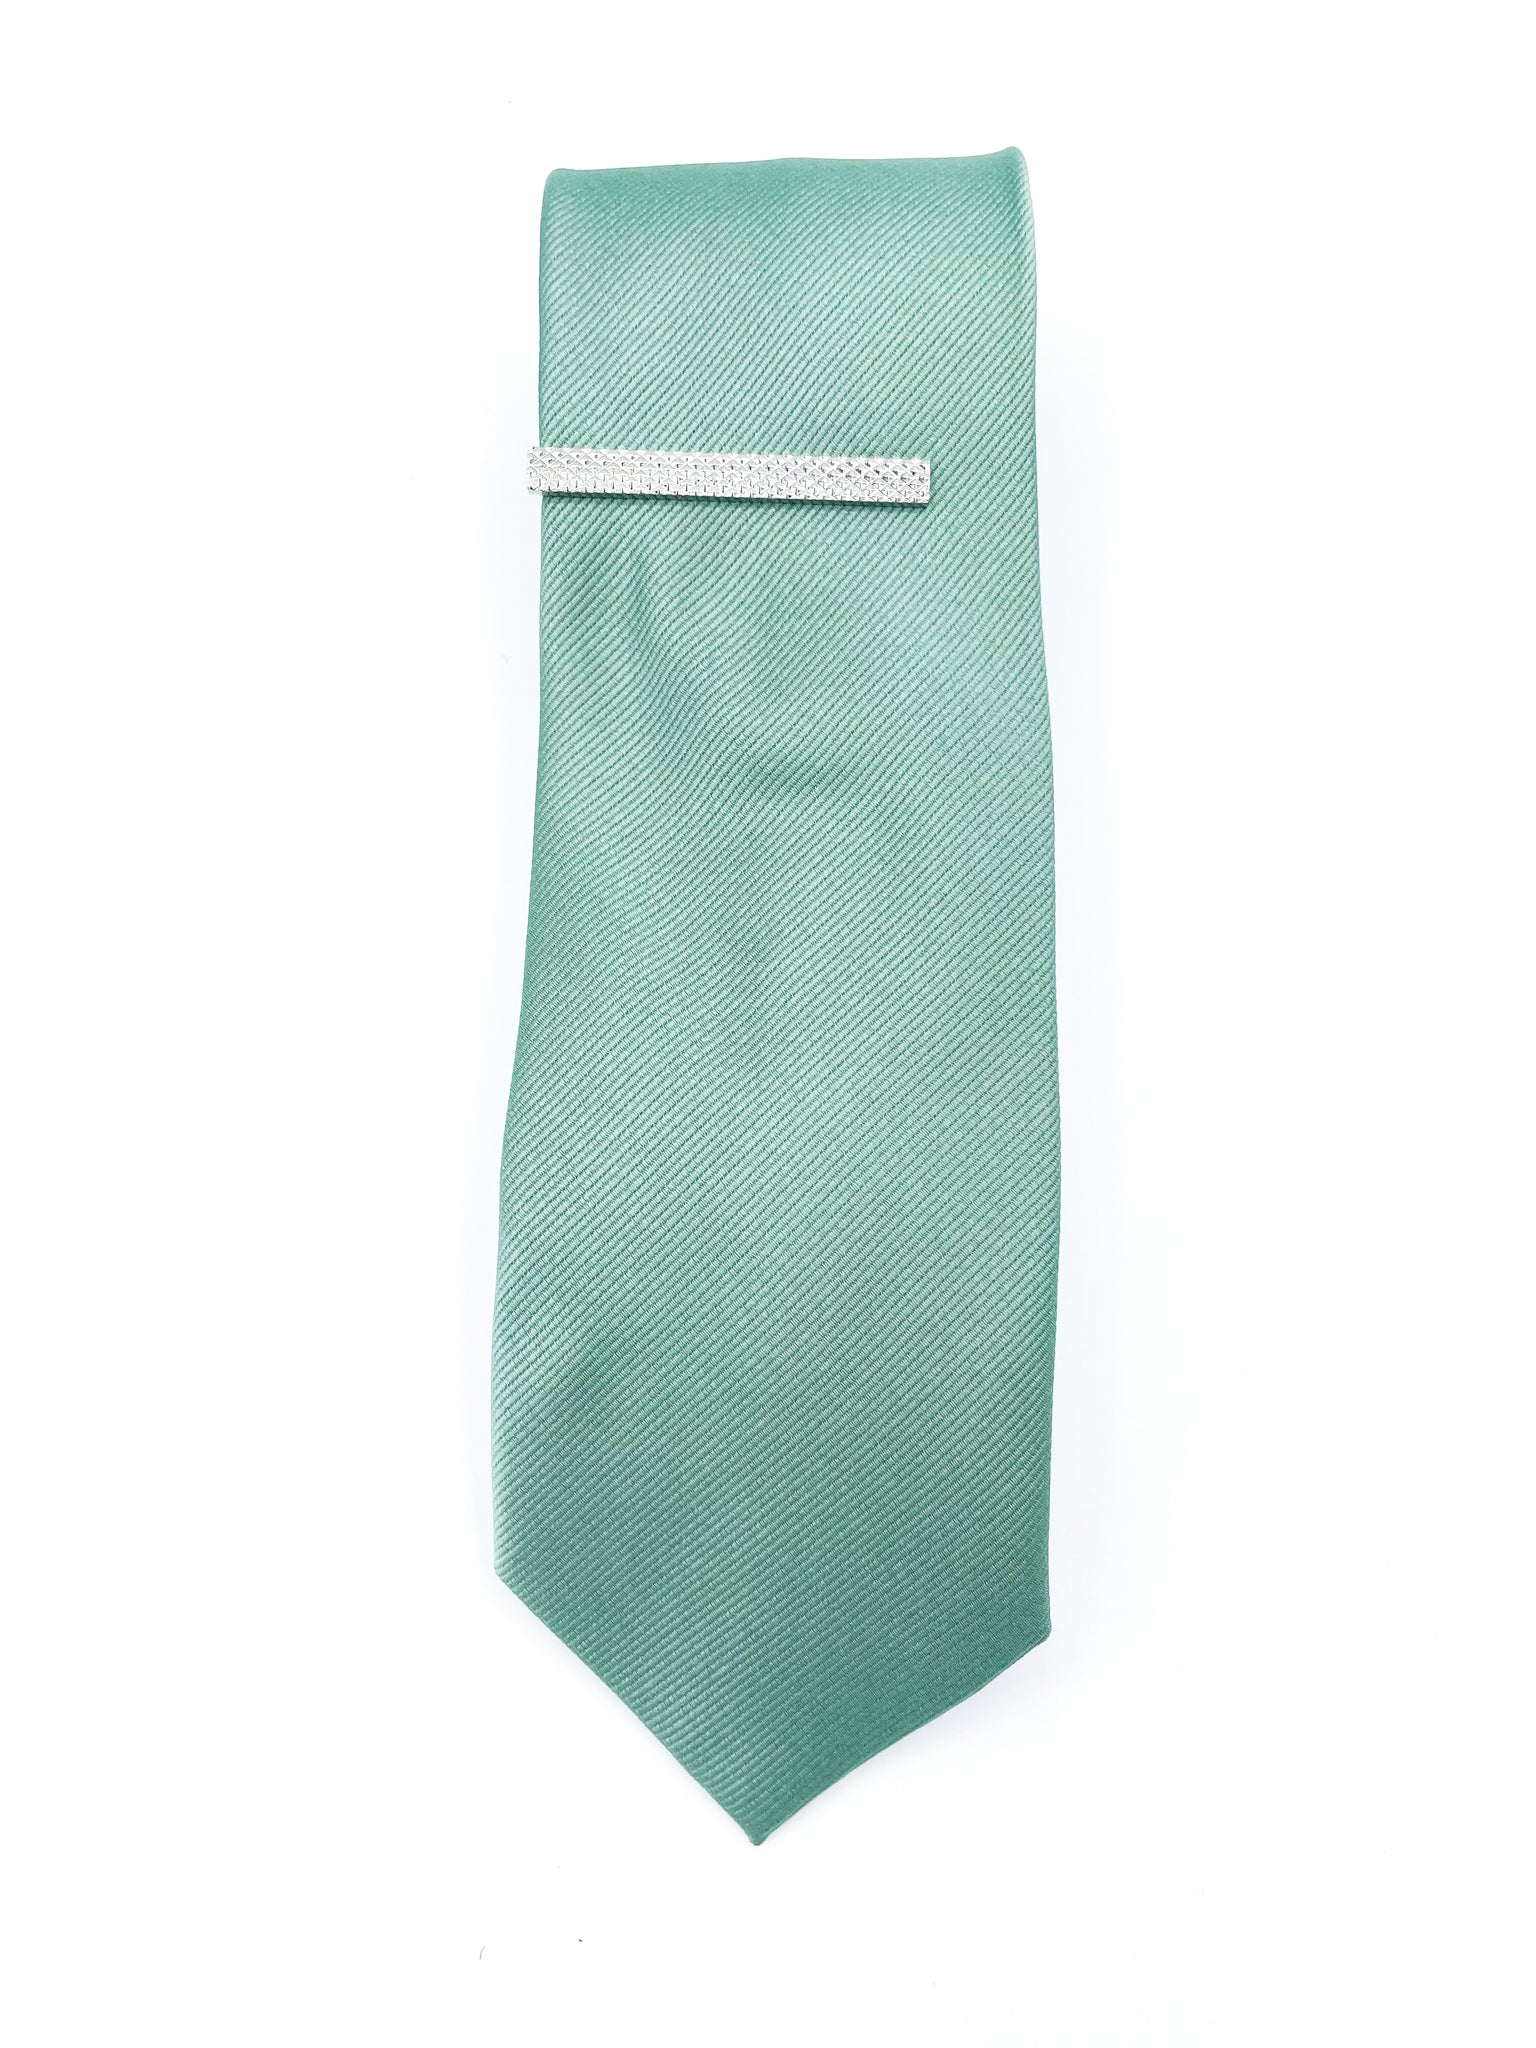 Mint tie with Floral Pocket Square, Lapel Pin, Tie Bar and Fabric Bag